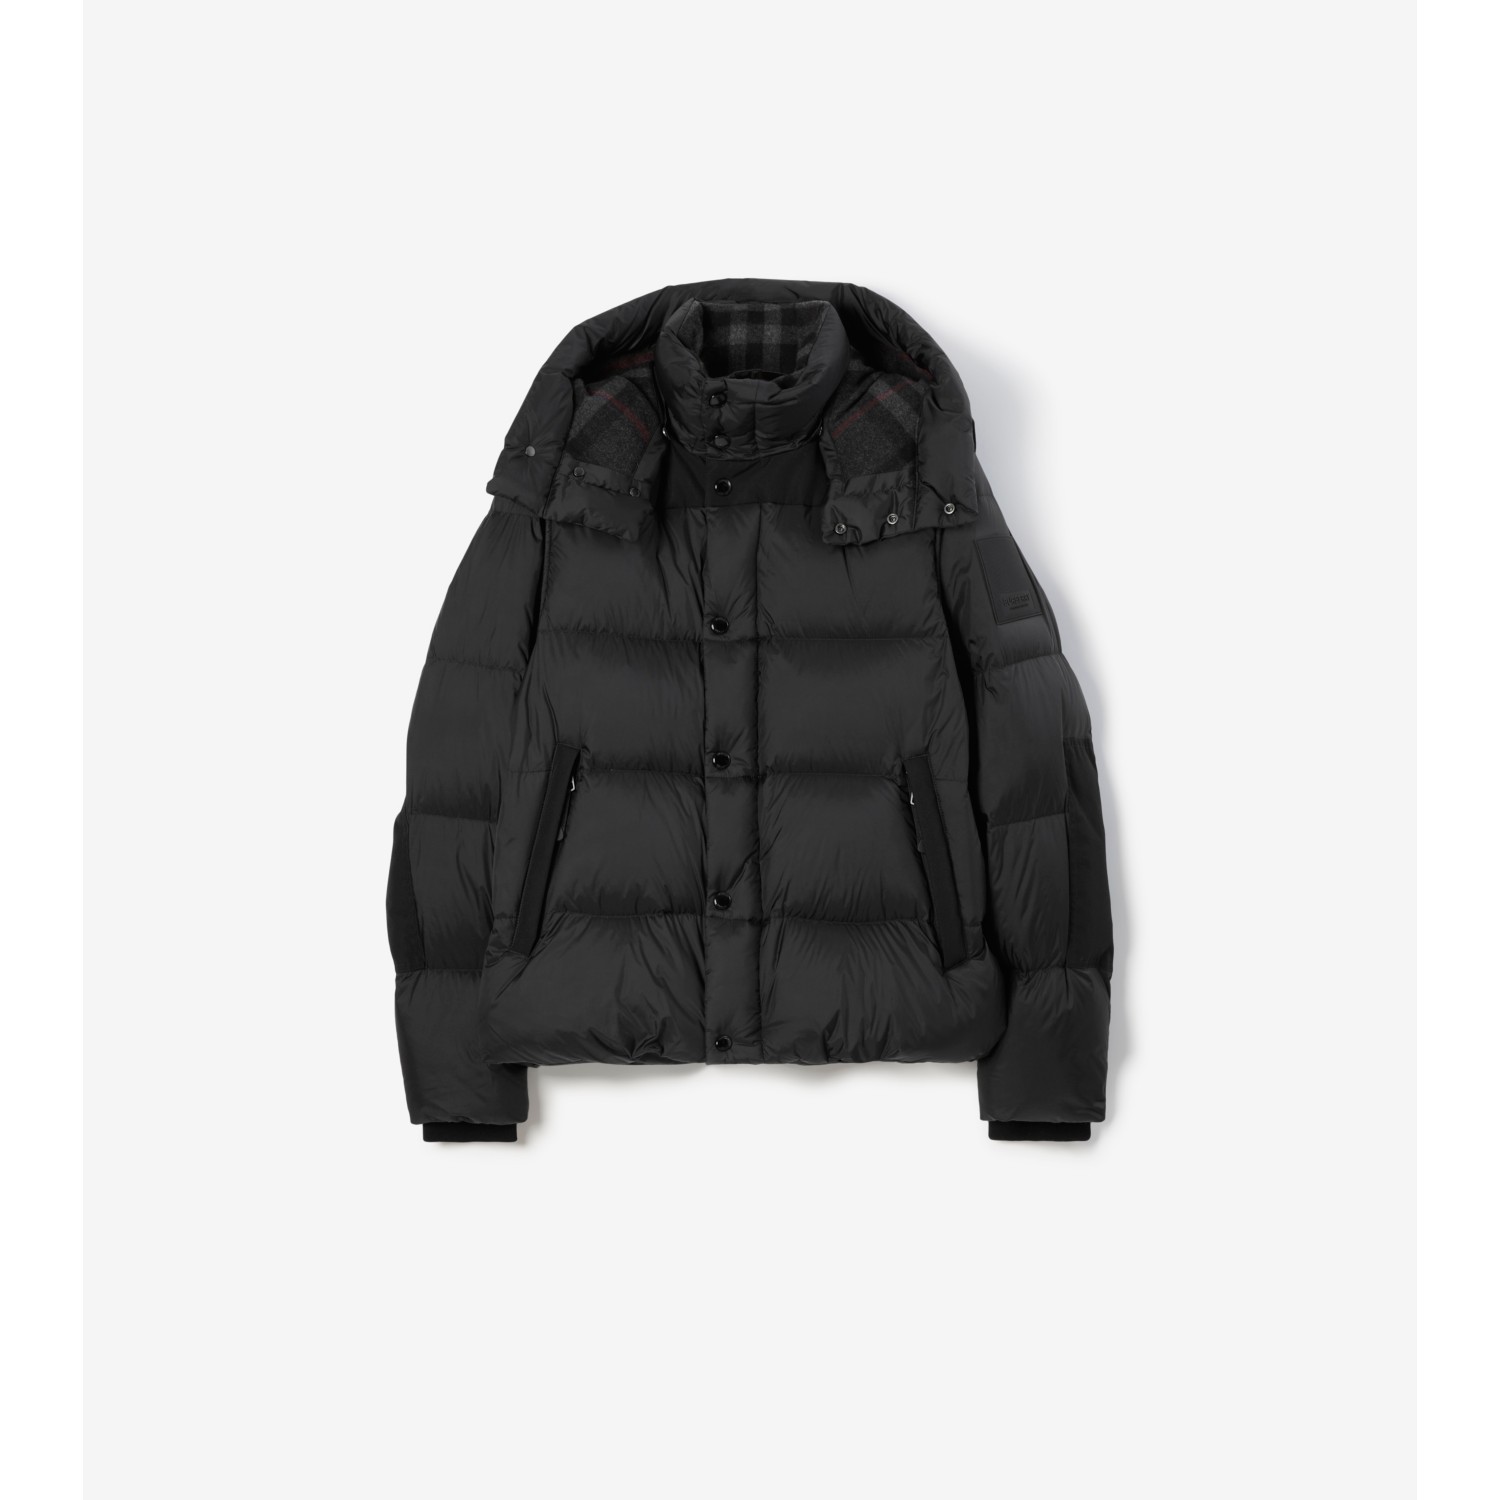 Unlock Wilderness' choice in the Burberry Vs Canada Goose comparison, the Detachable Sleeve Nylon Puffer Jacket by Burberry